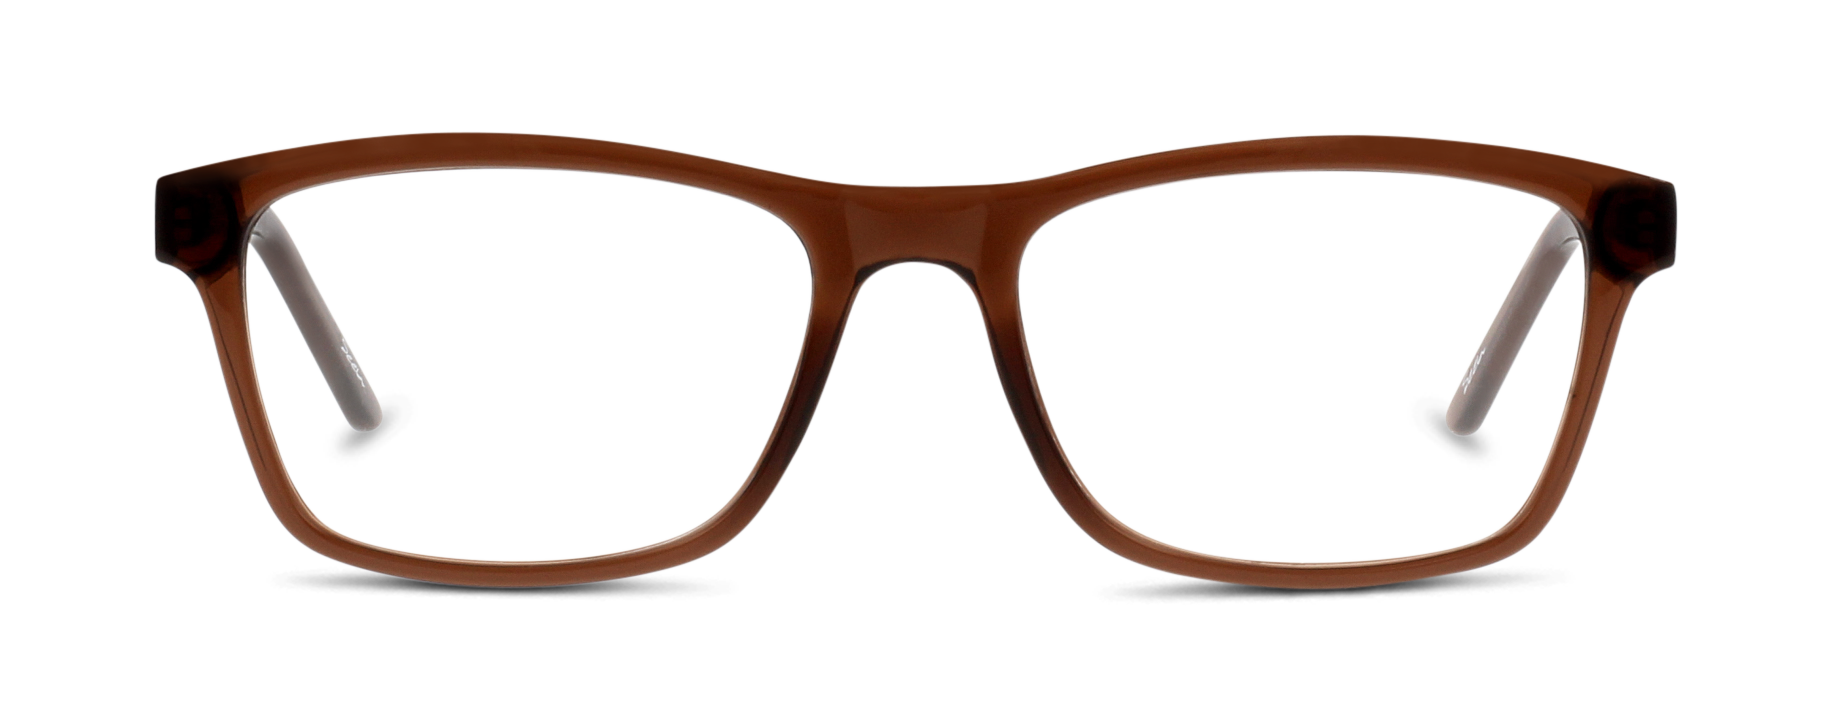 Front Seen SNKM04 (NN) Glasses Transparent / Brown